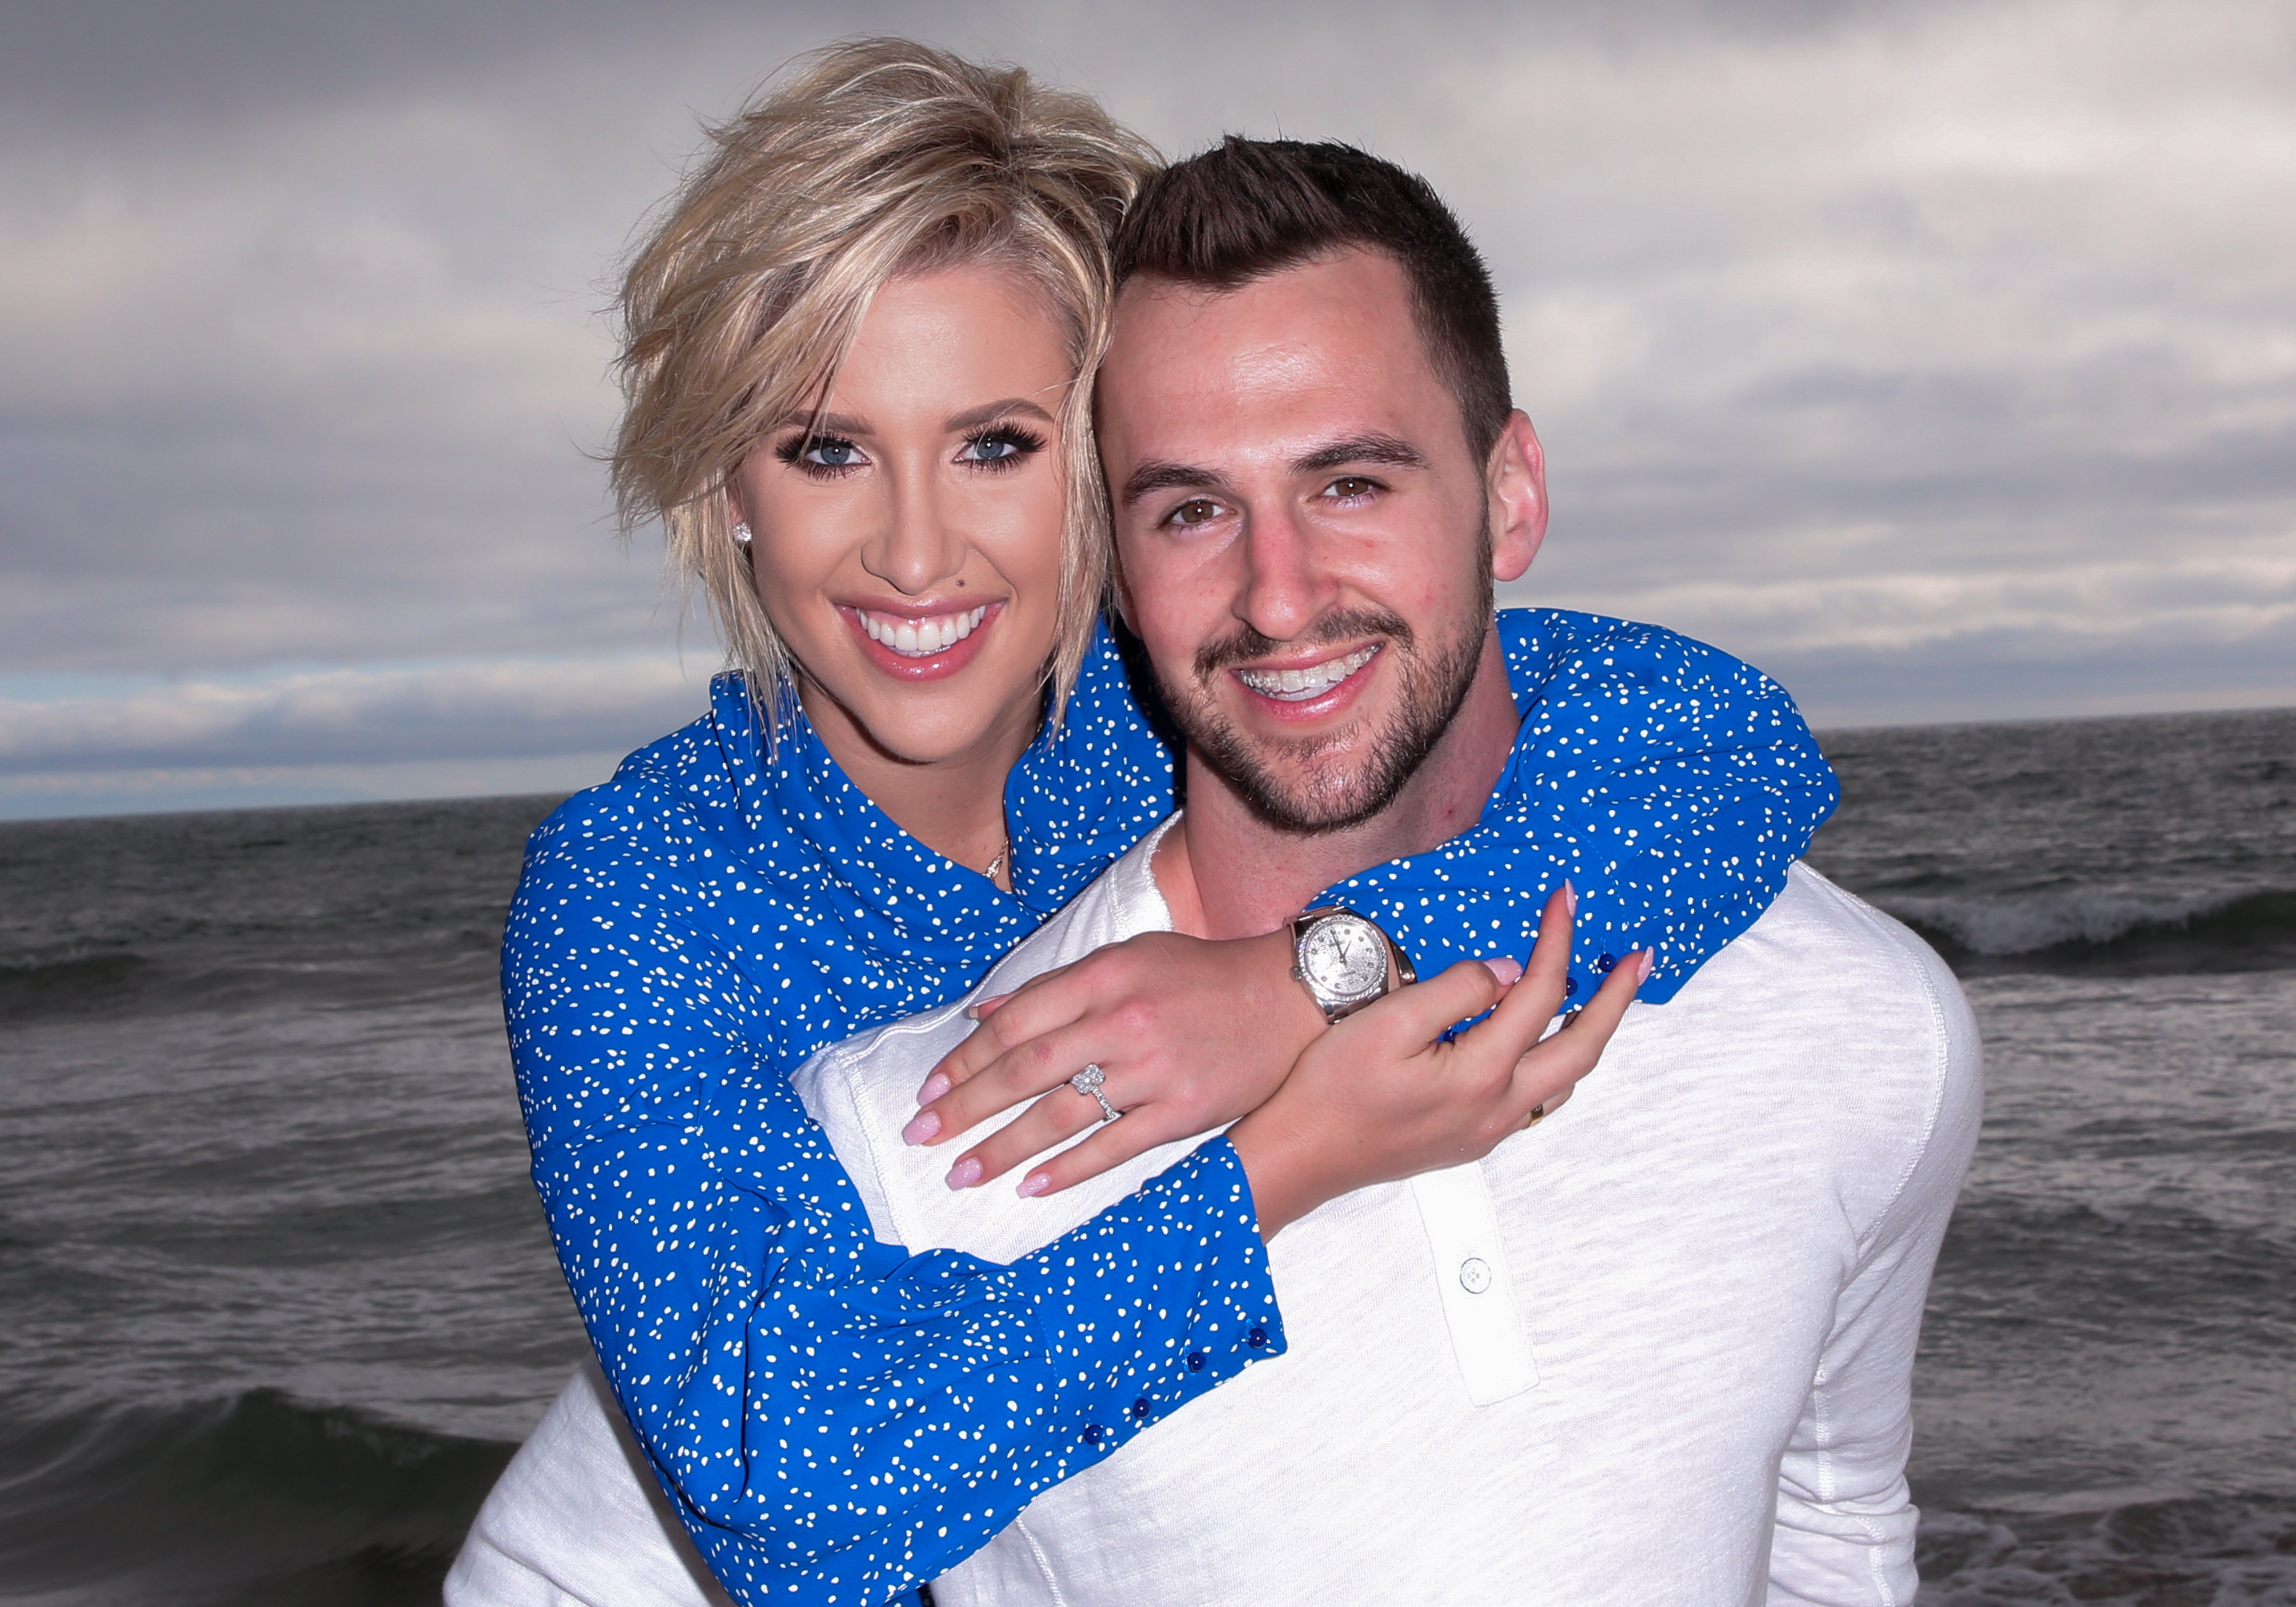 Savannah Chrisley (L) and Nic Kerdiles celebrate their Engagement on March 27, 2019, in Santa Monica, California. | Source: Getty Images.